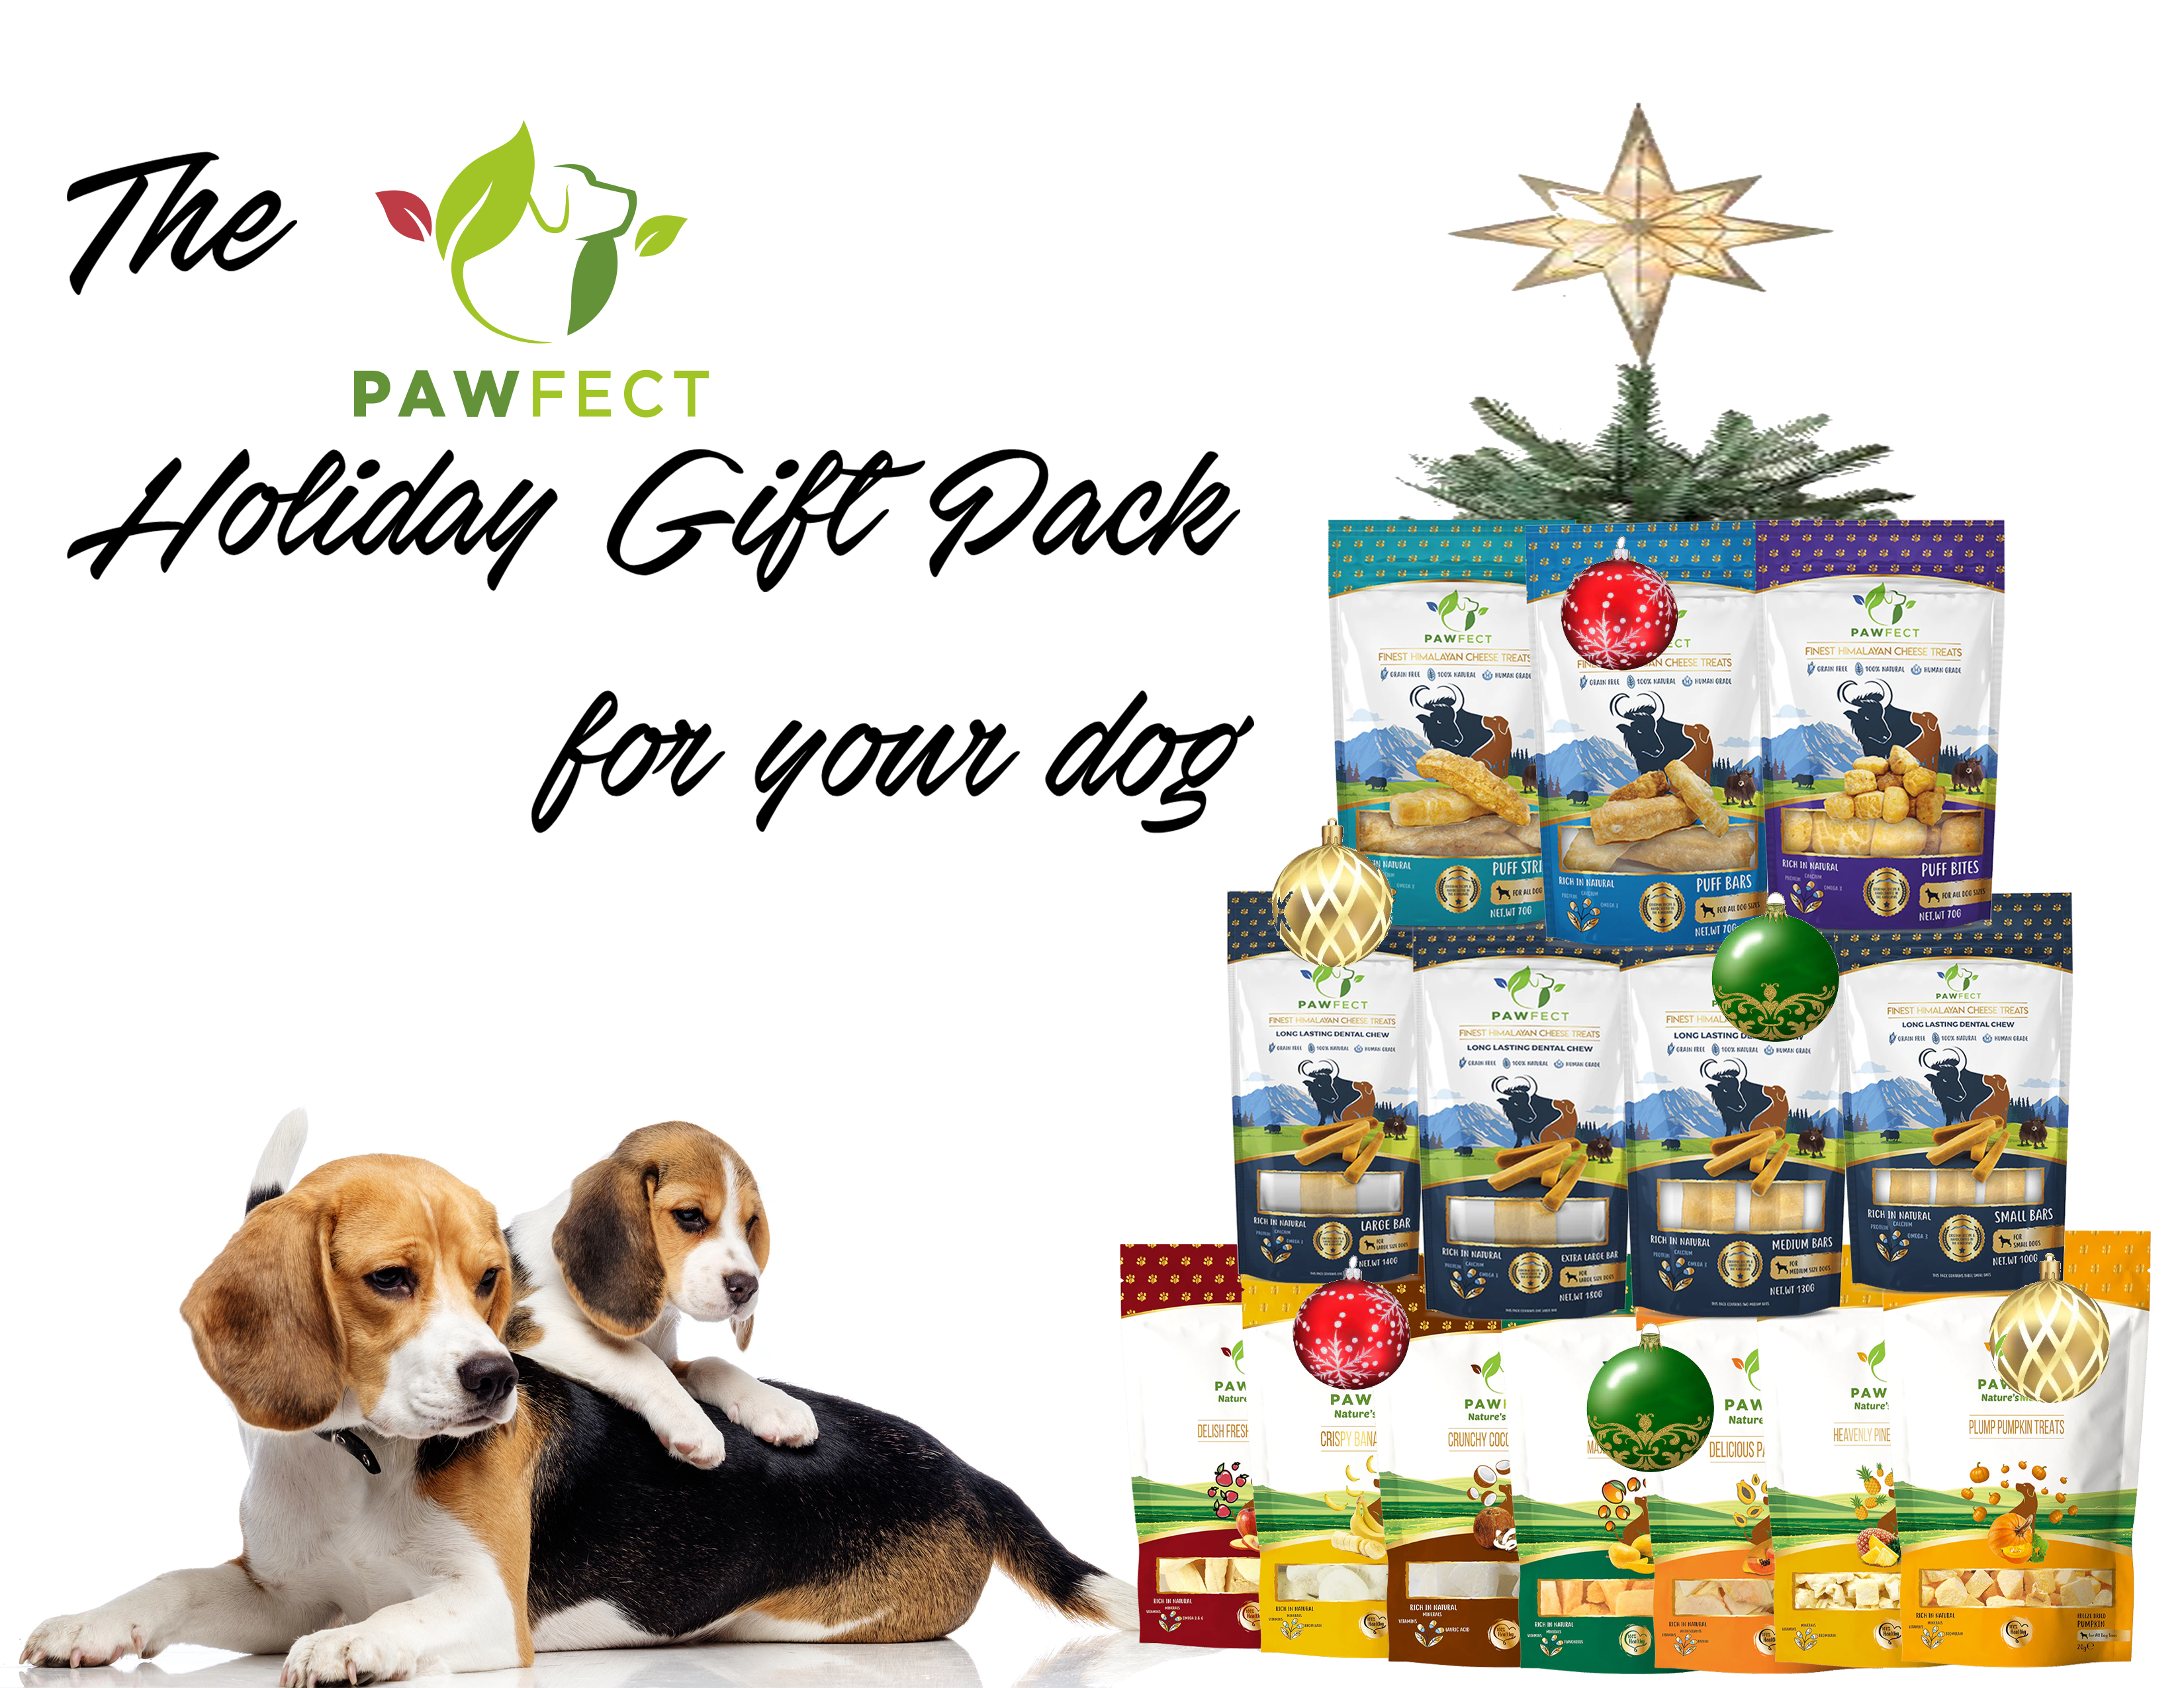 The Pawfect Holiday Gift Pack for your Dog!